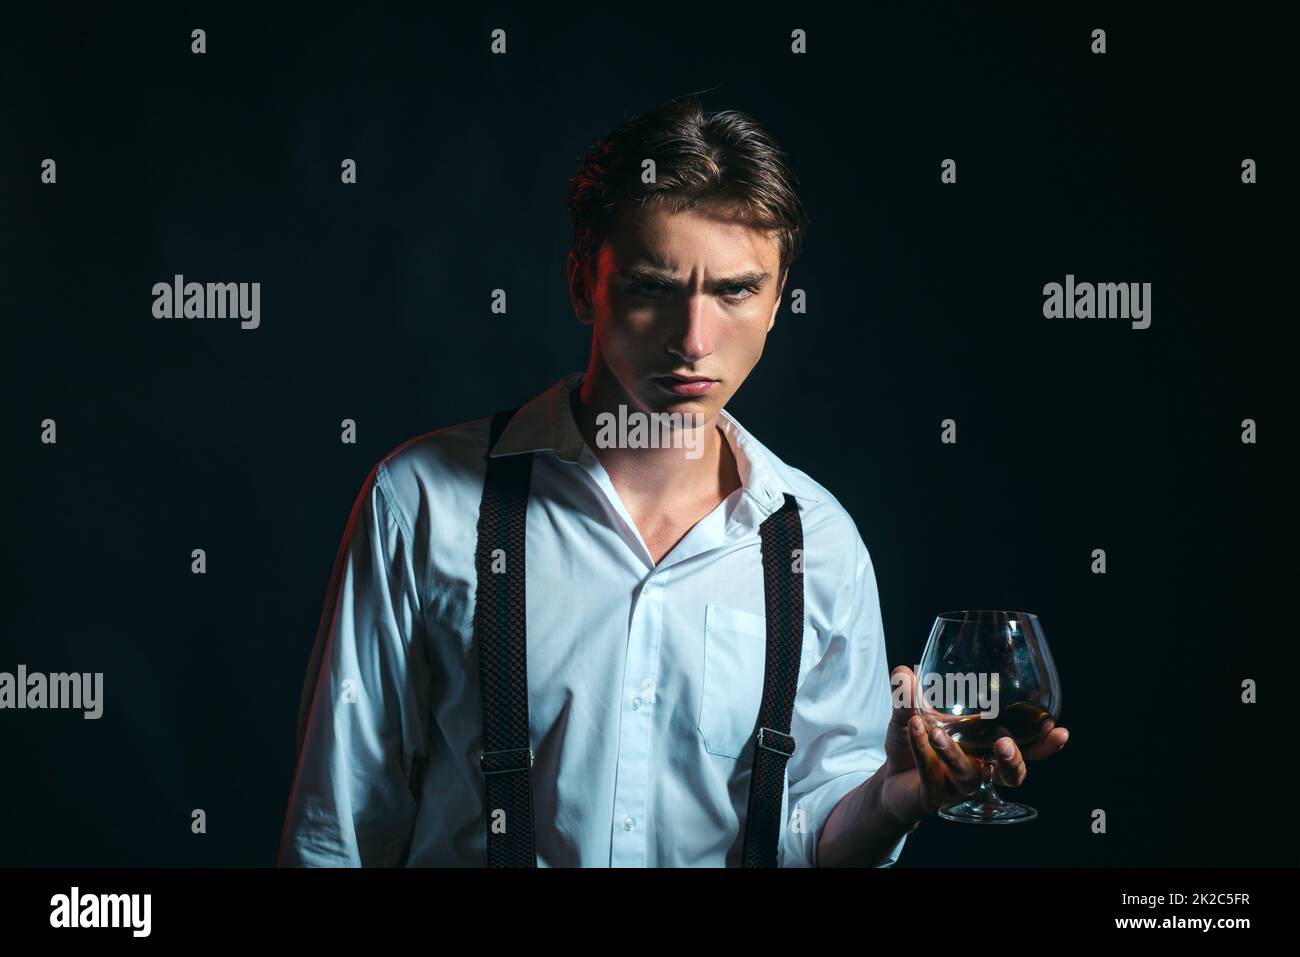 Elegant and stylish man in classical wear with wiskey. Stylish rich young man holding a glass of old whisky. Stock Photo